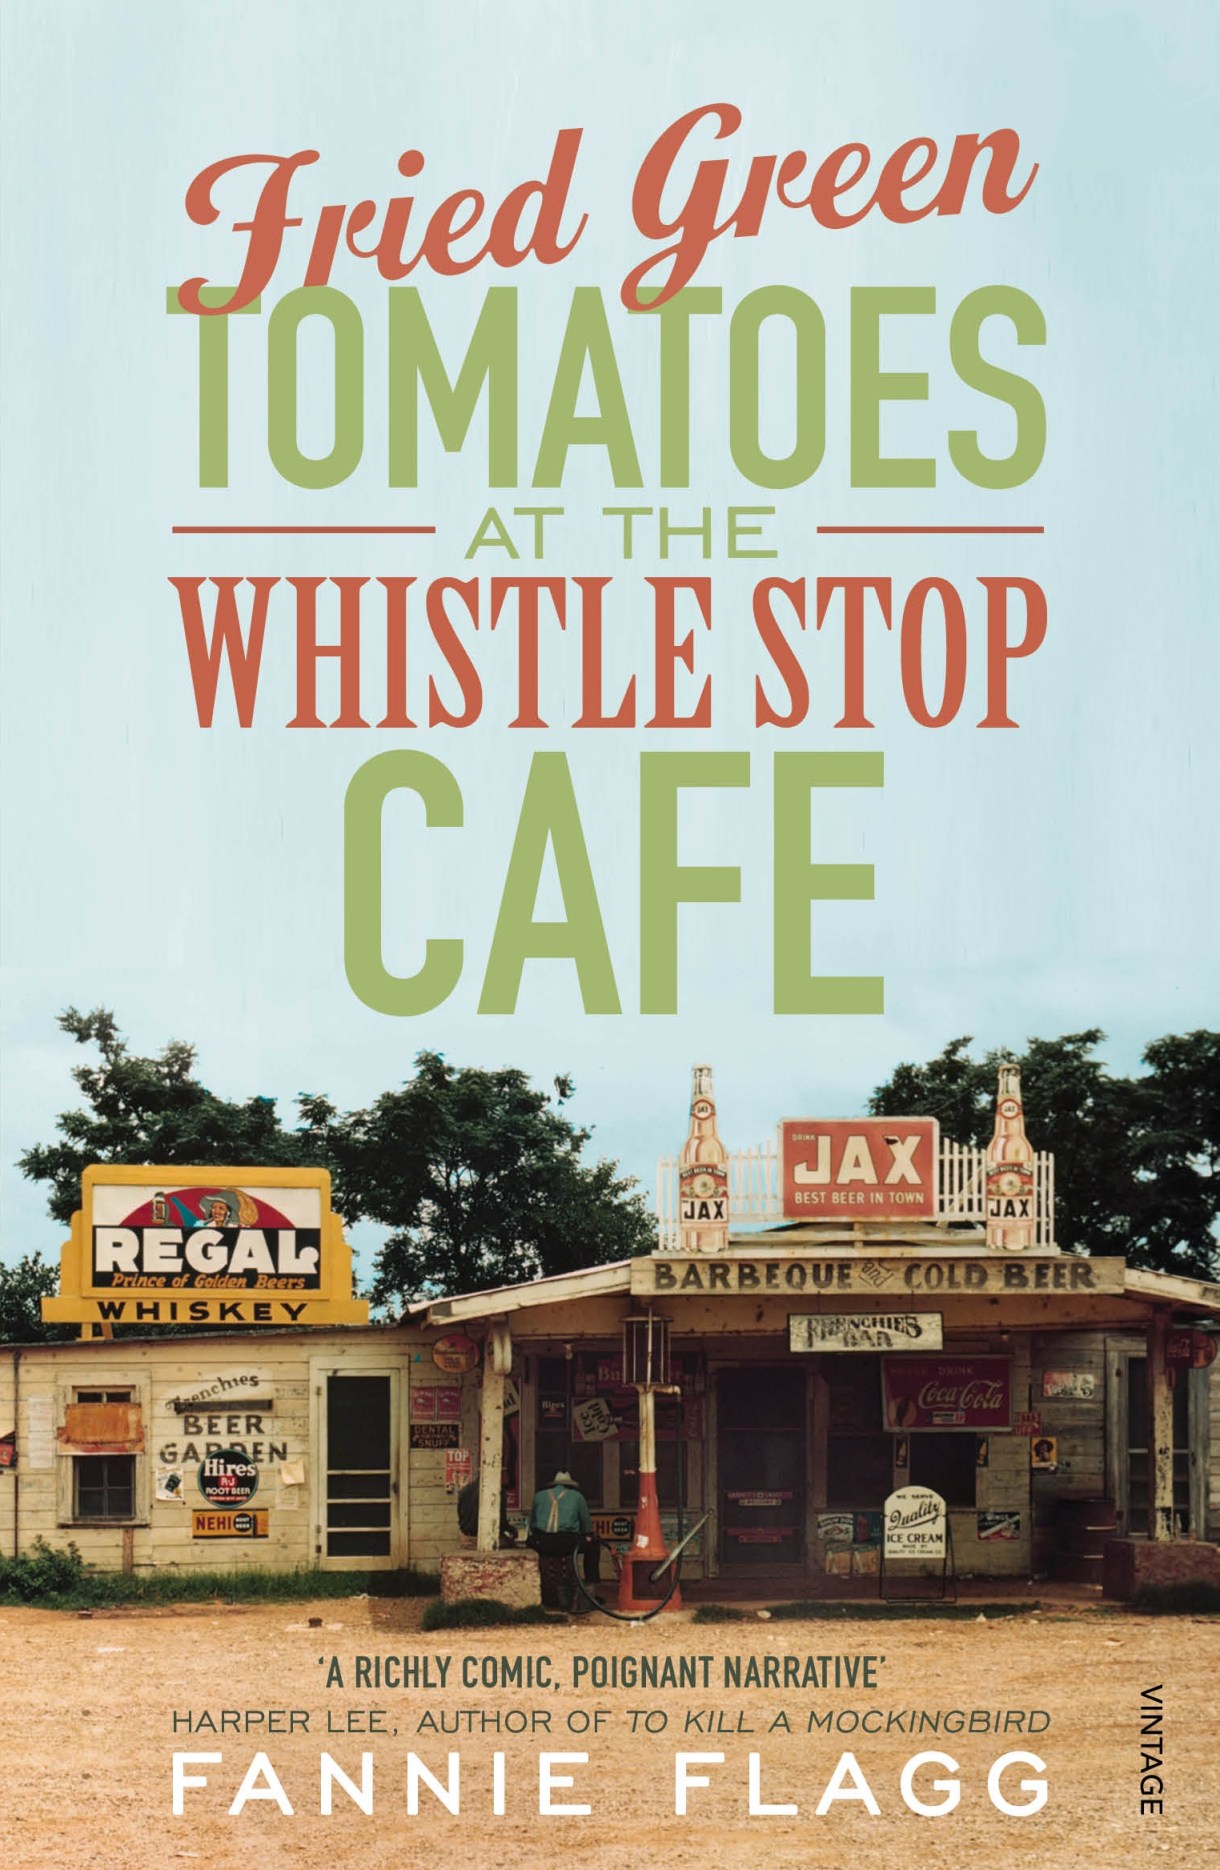 Frid Green Tomatoes at the Whistle Stop Cafe by Fanie Flagg